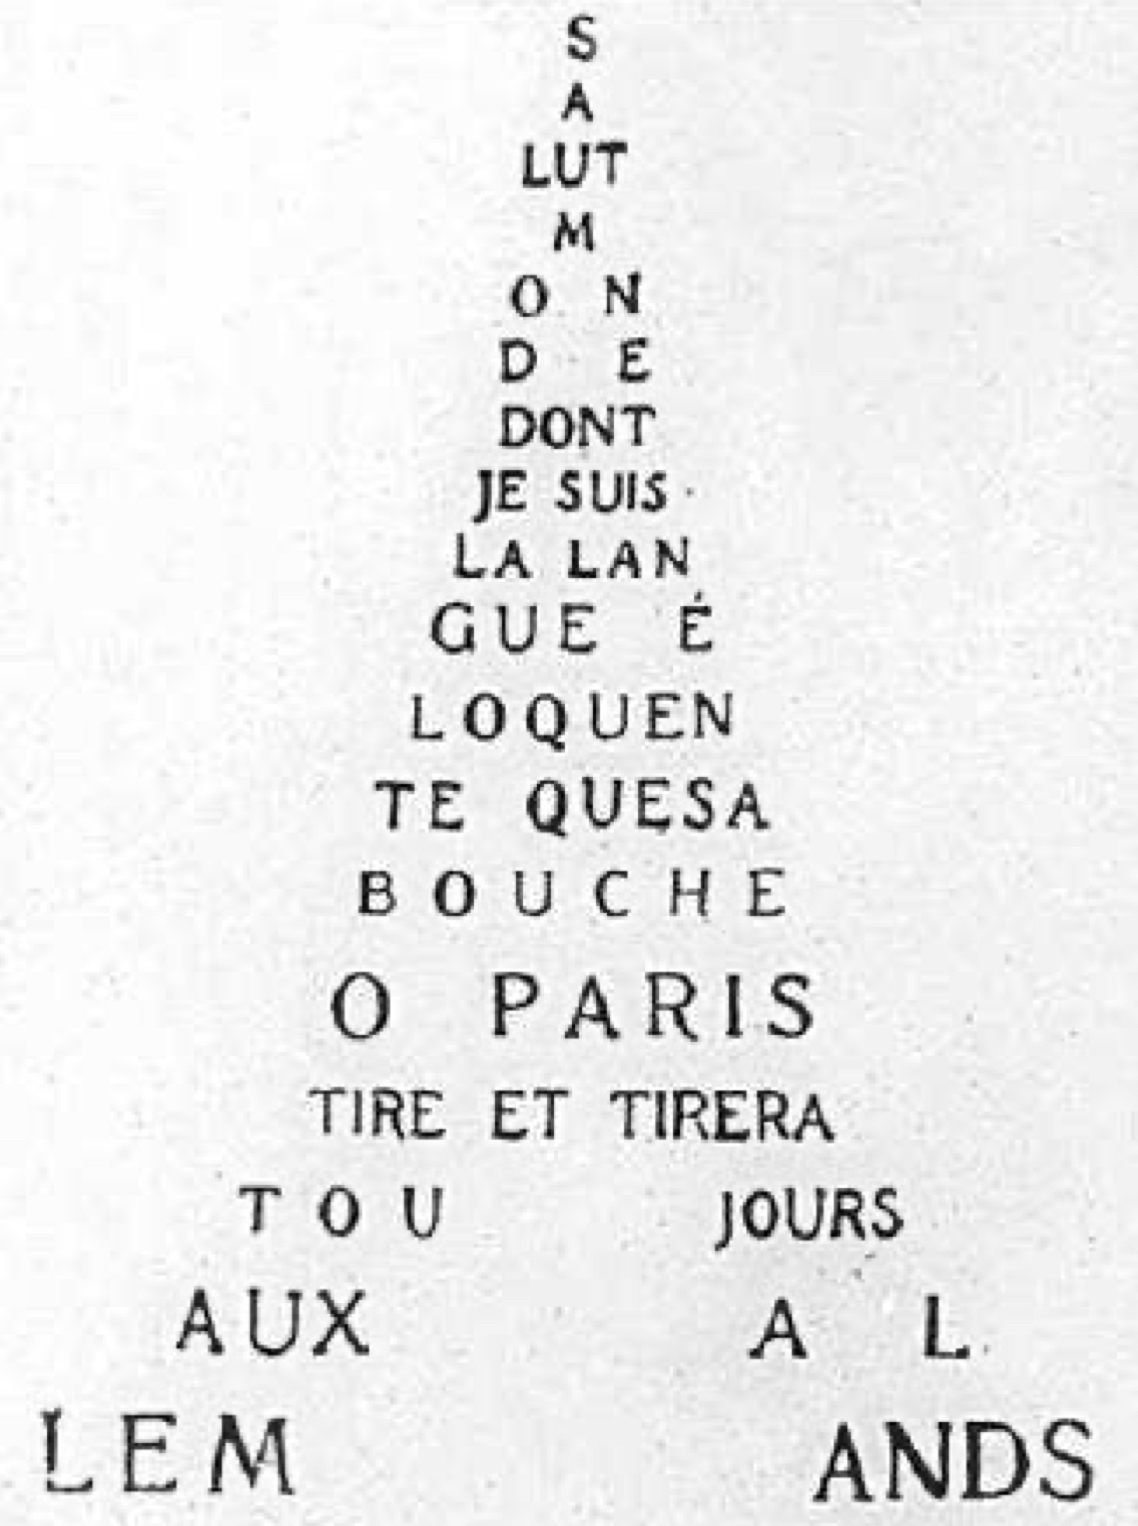 Calligram poem in the shape of the Eiffel Tower